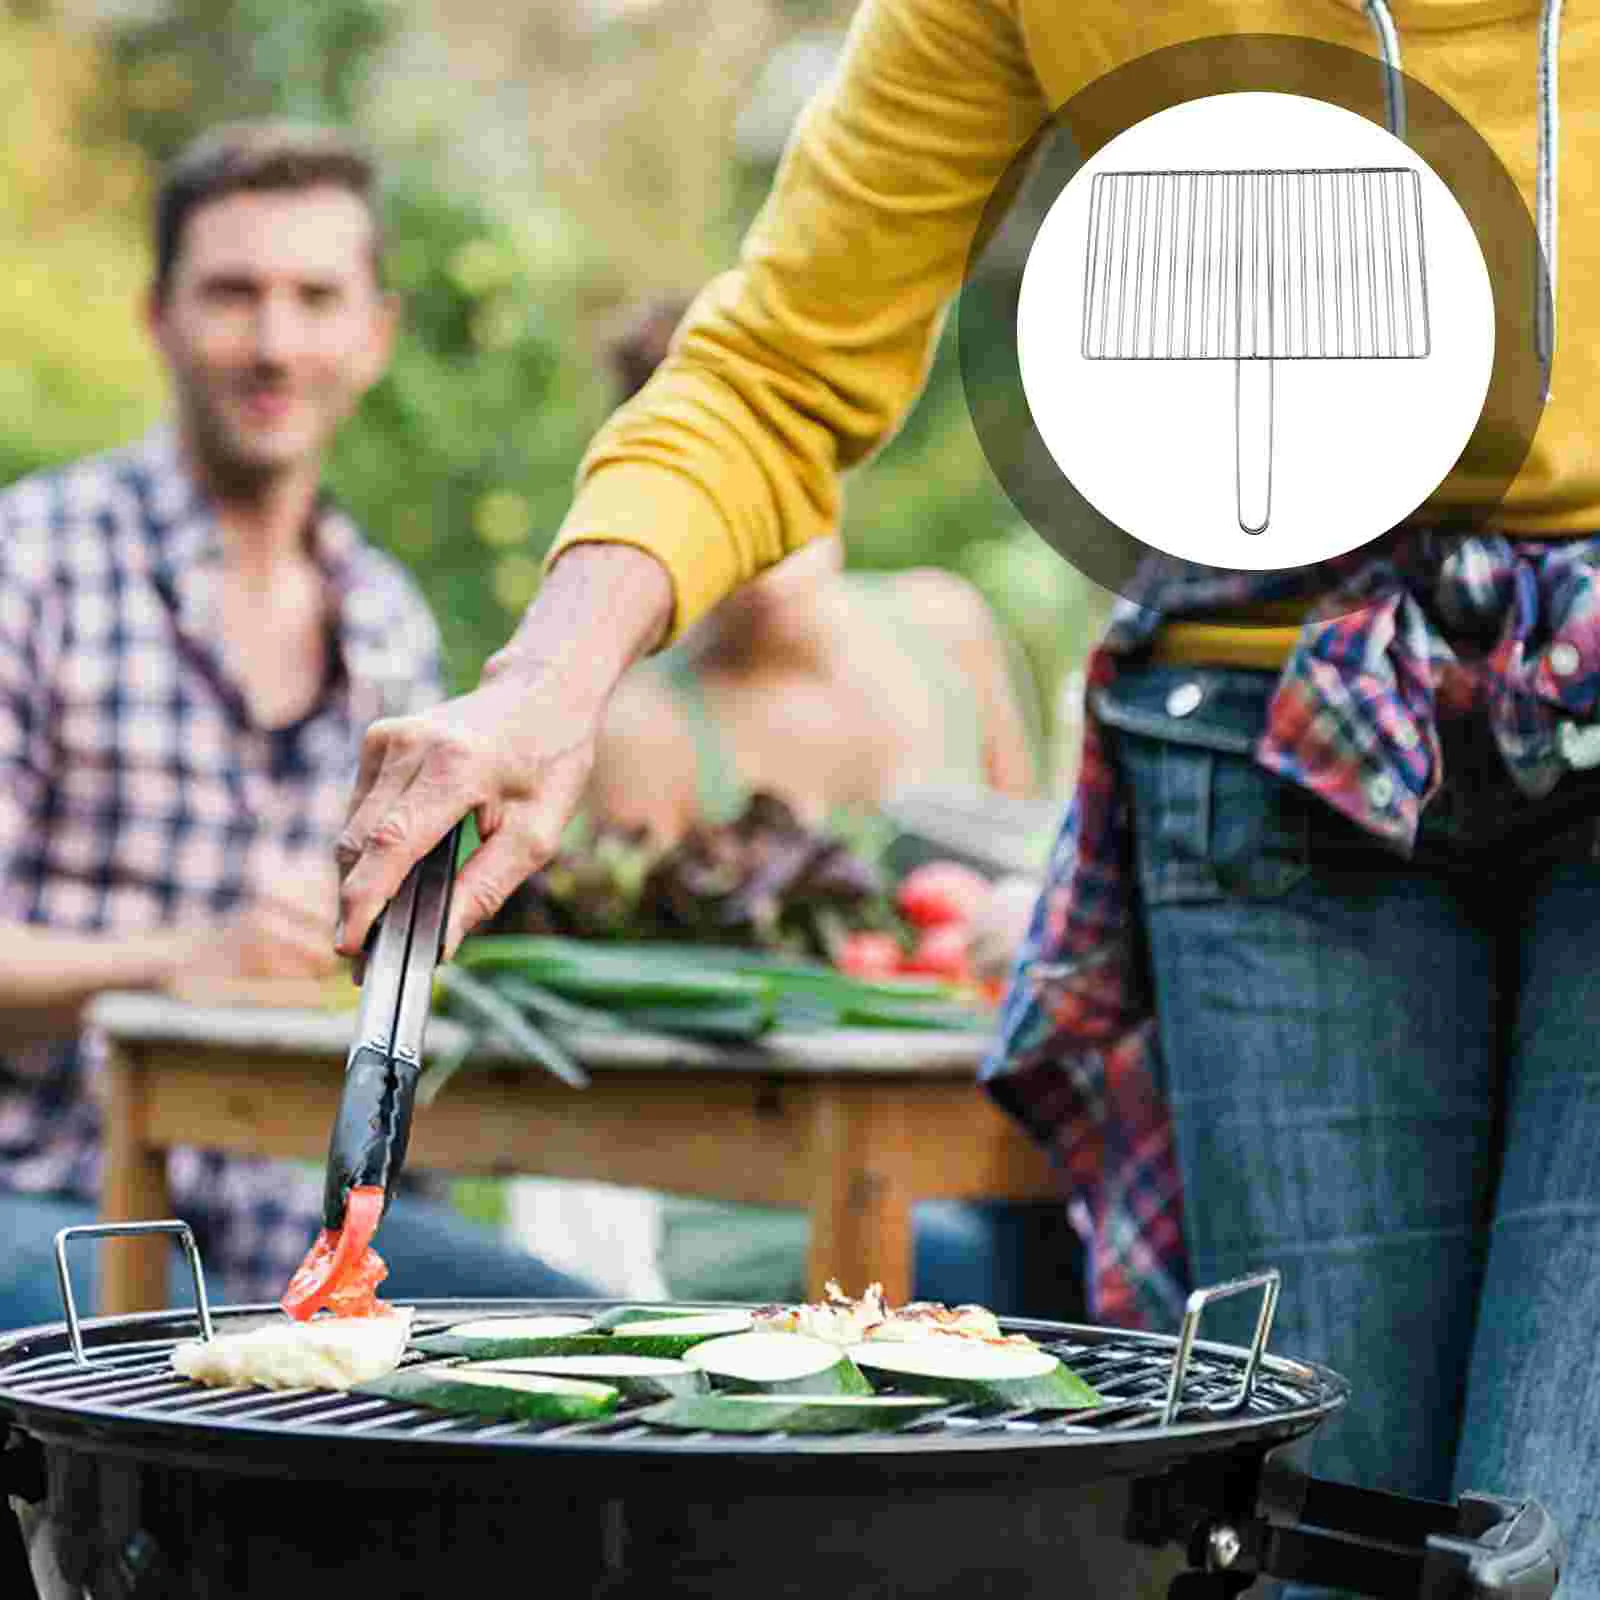 

Beef Grilling Racks Top Griddle Outdoor Barbecue Tool Fish Basket Accessories Stainless Steel Vegetable Mesh Camping Grate